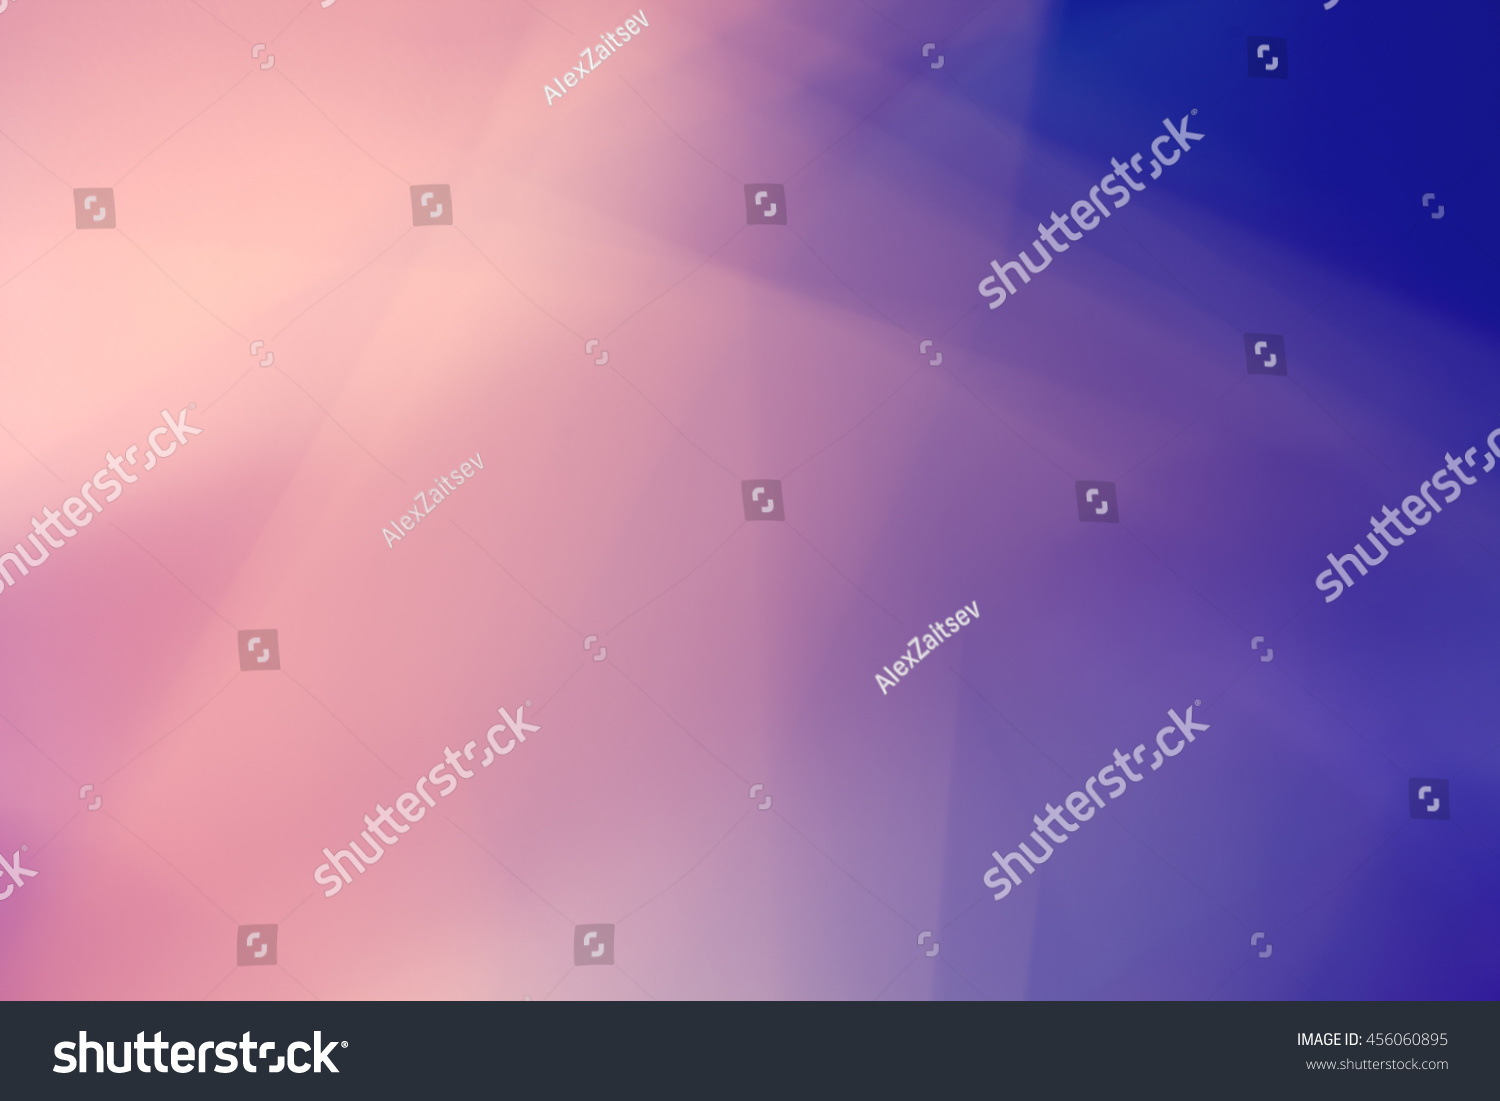 abstract background with abstract smooth lines pantone color #456060895